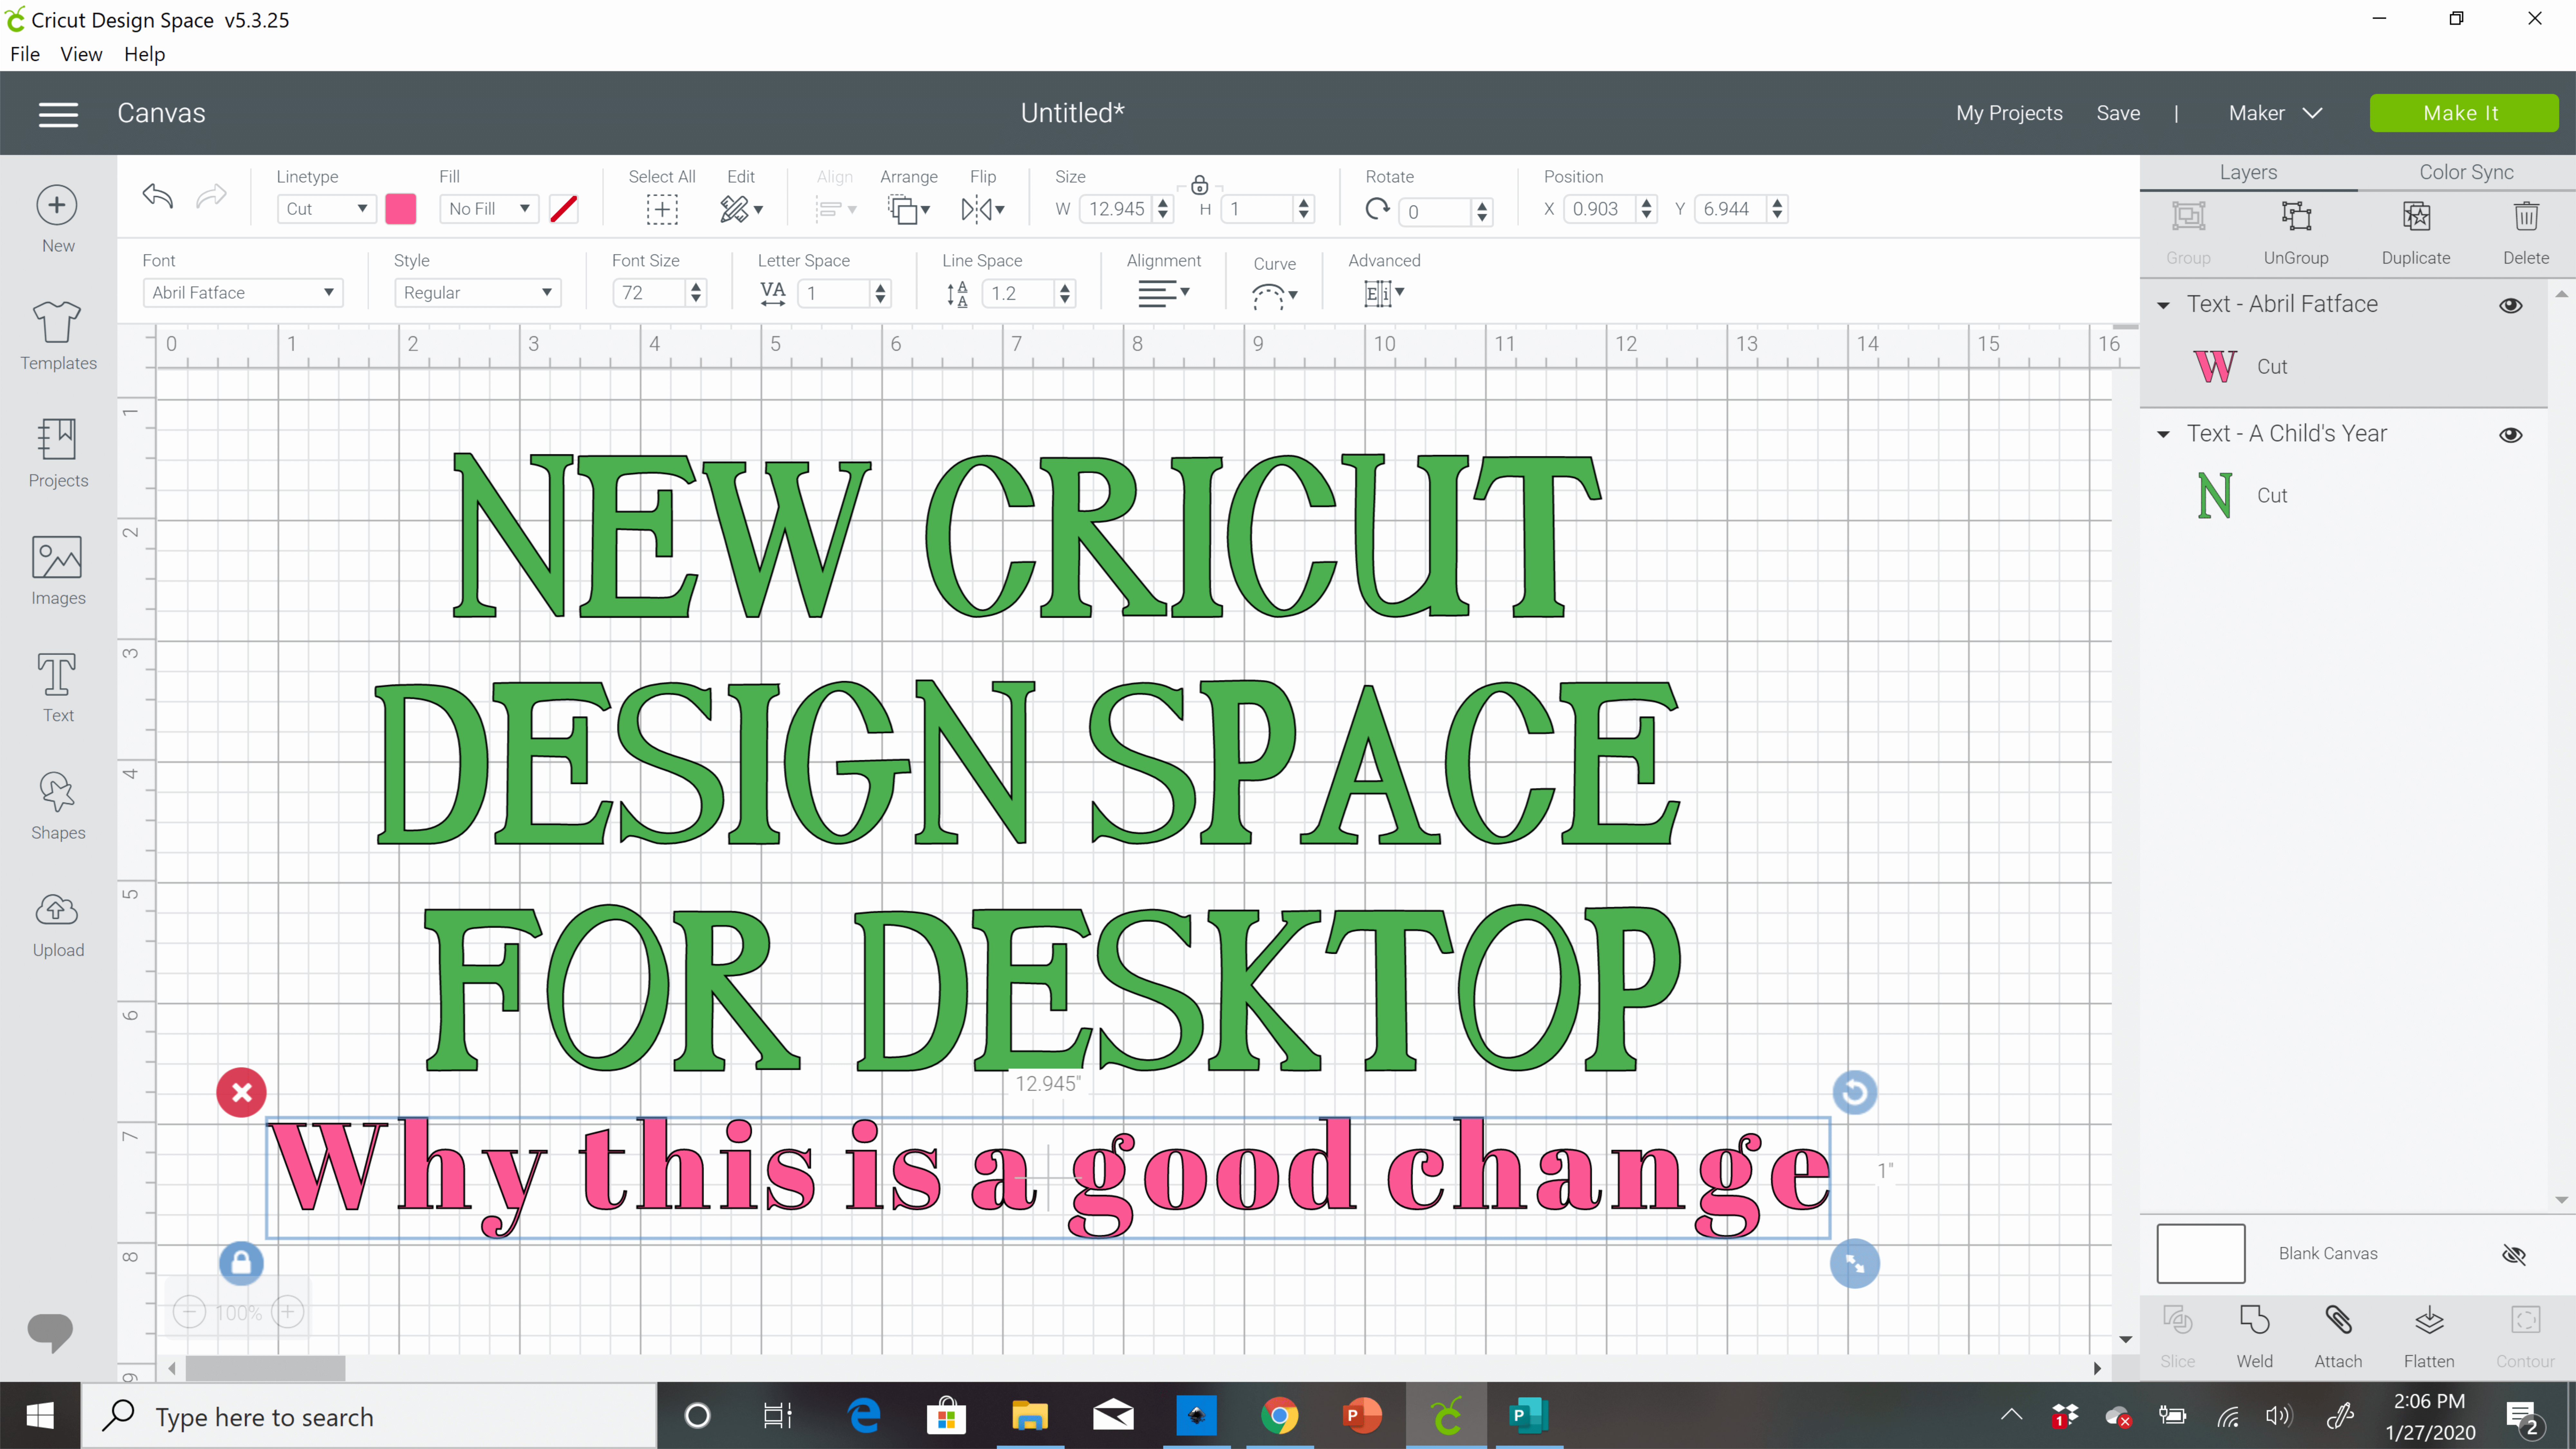 A computer screenshot of the Cricut Design Space canvas grid with pink and green text displayed. The green text says "New Cricut Design Space for Desktop", and the smaller pink text says "why this is a good change"